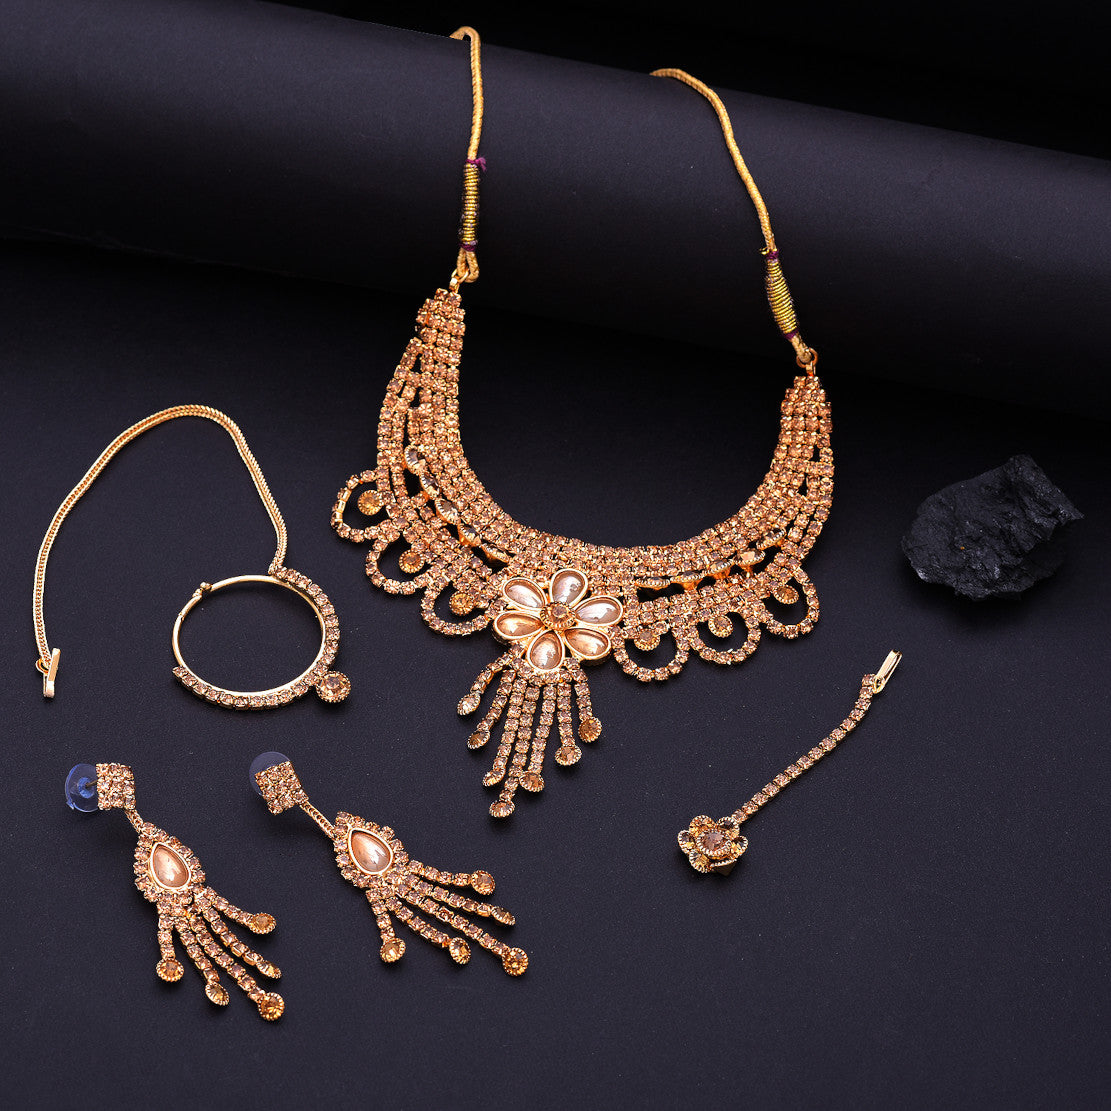  Best Gold Plated Traditional Handcrafted Designed by Mekkna of Necklace, Maang-Tika with Earrings for Women. Now We can Book This Jewellery set online from Mekkna.